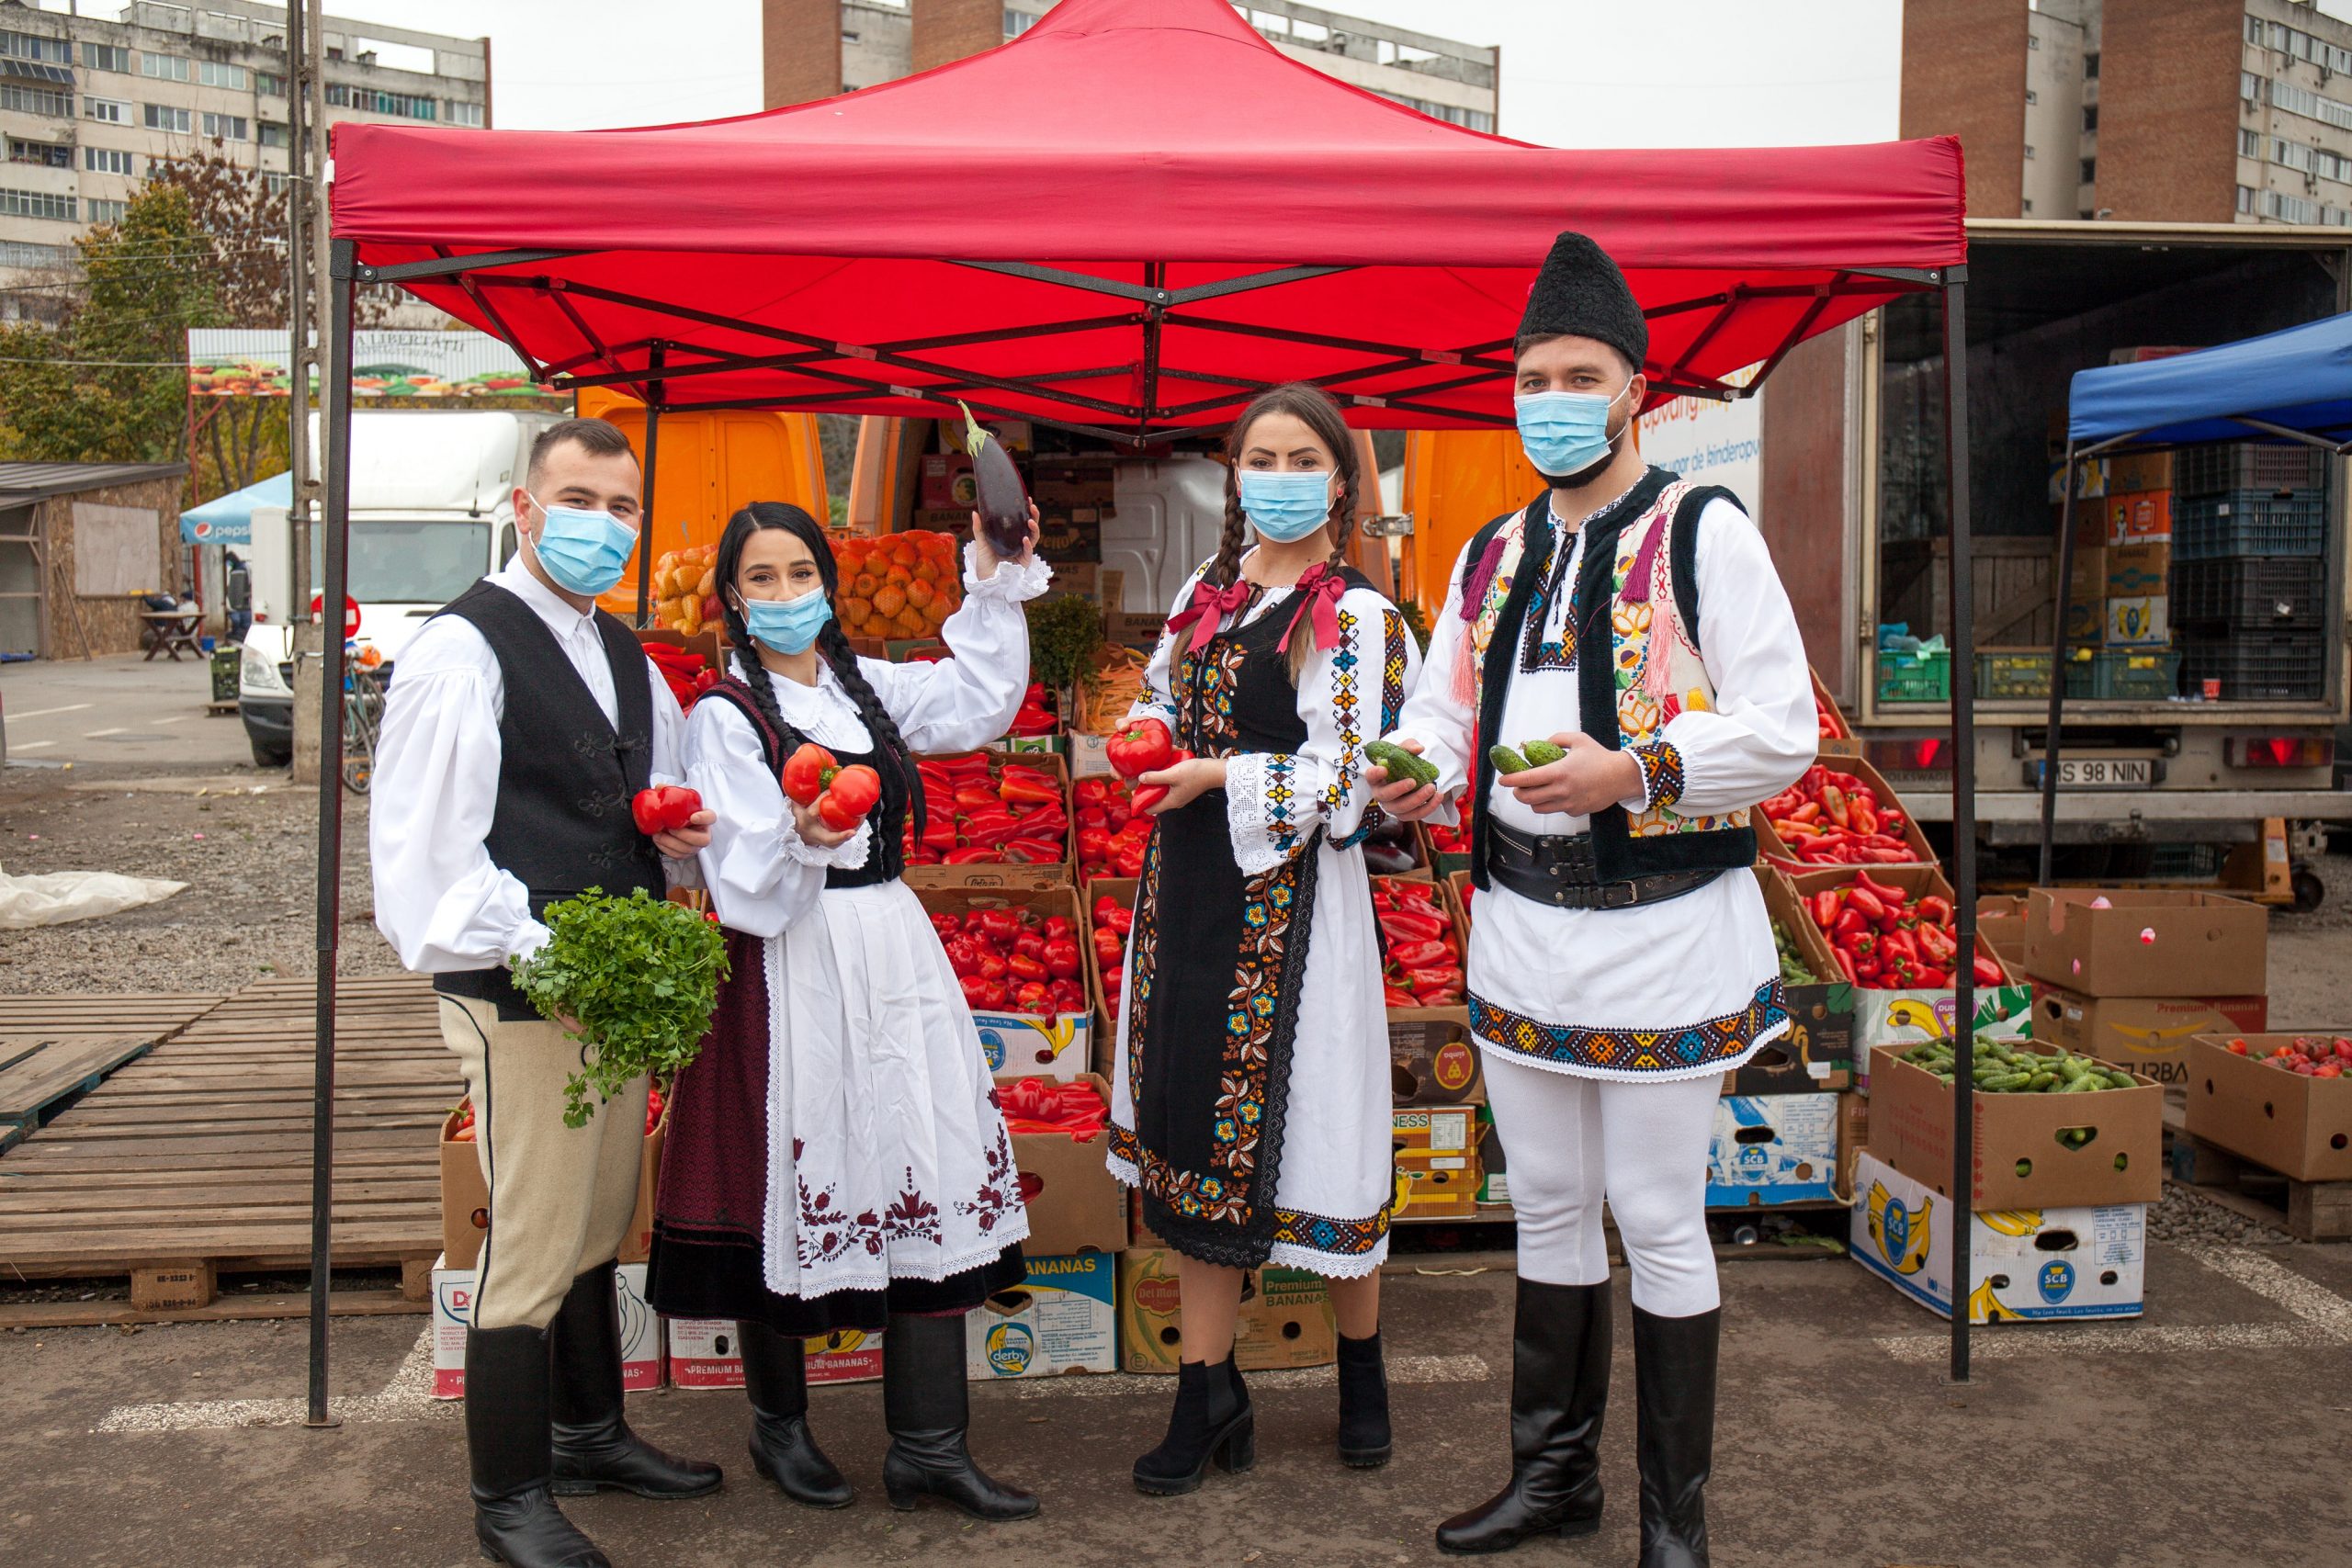 Romanians in traditional Romanian clothes wearing masks